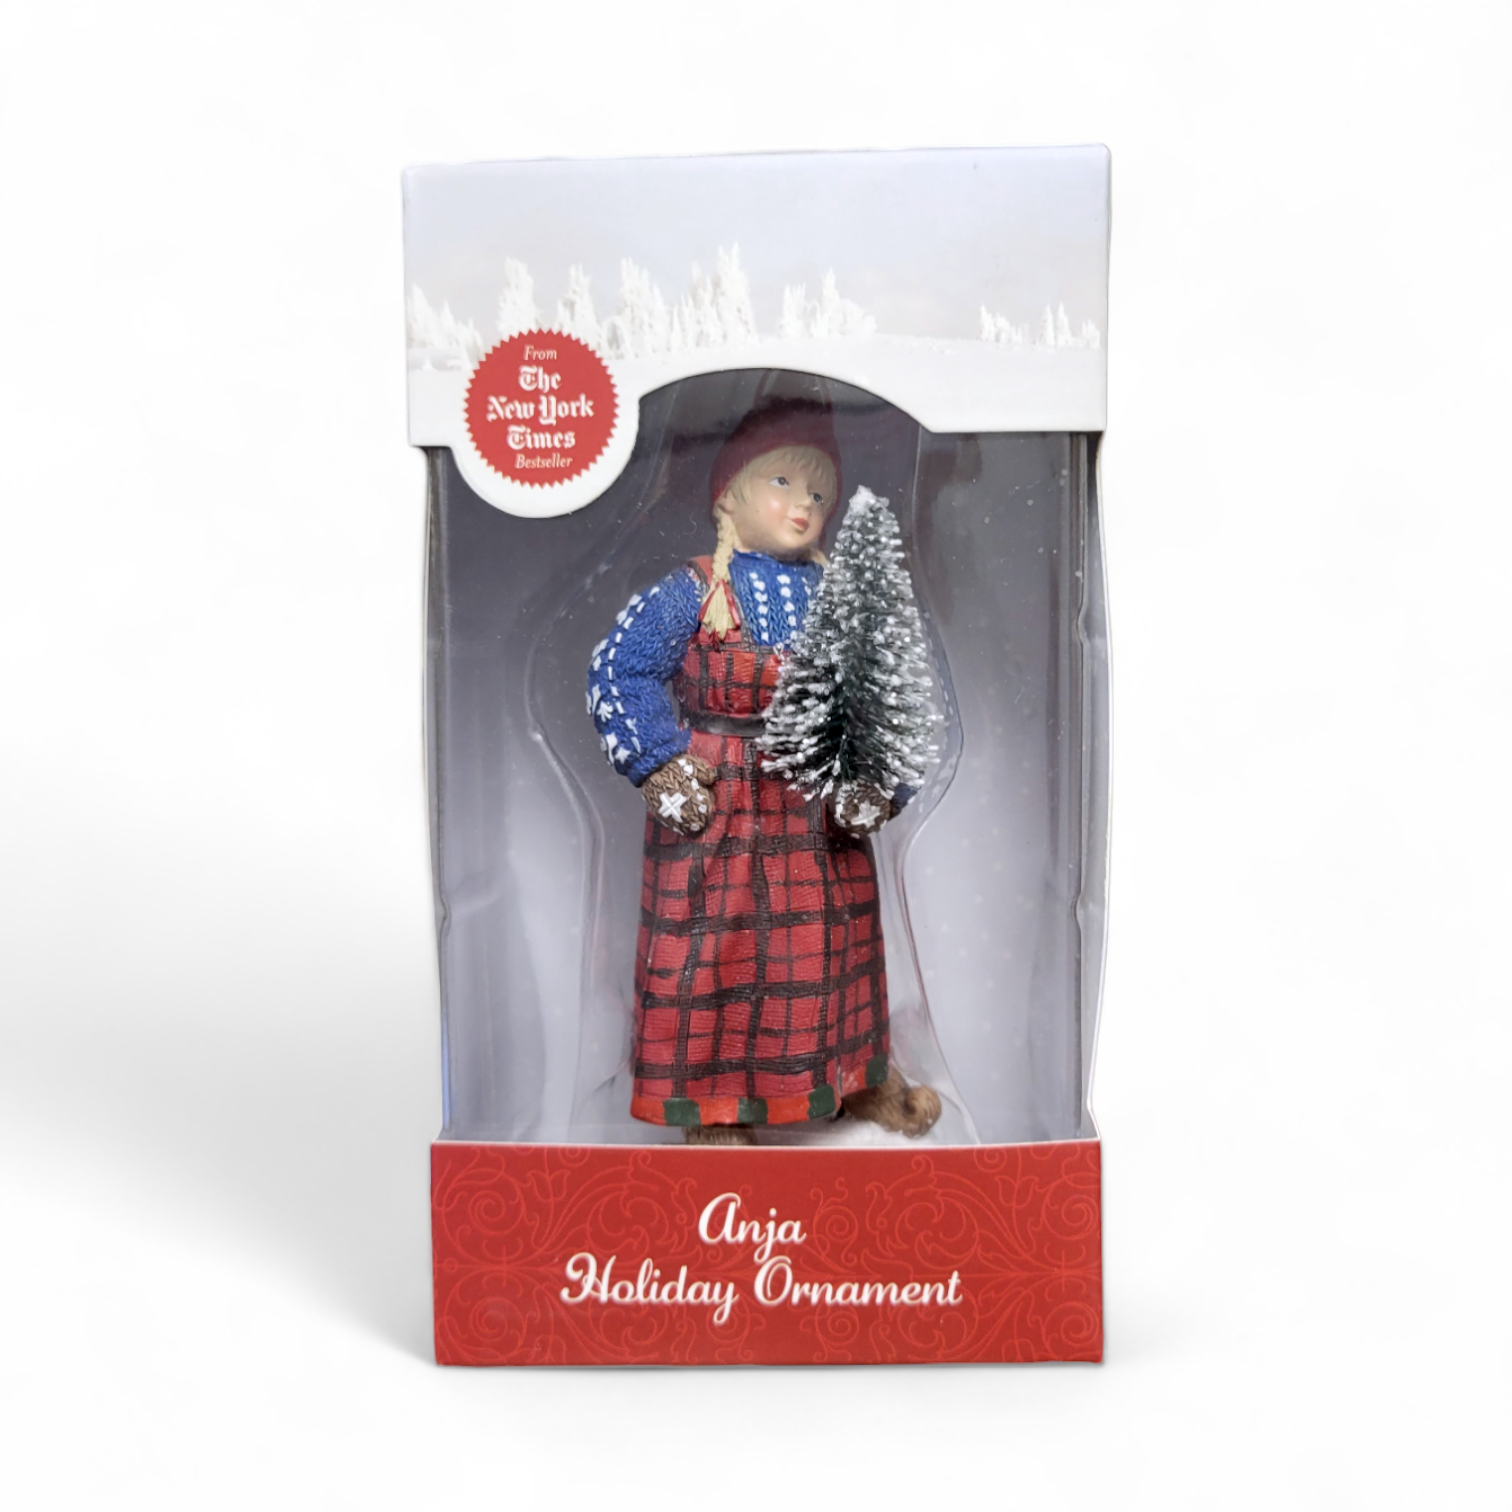 Ornament: Anja Holiday Ornament New York Times Best Seller